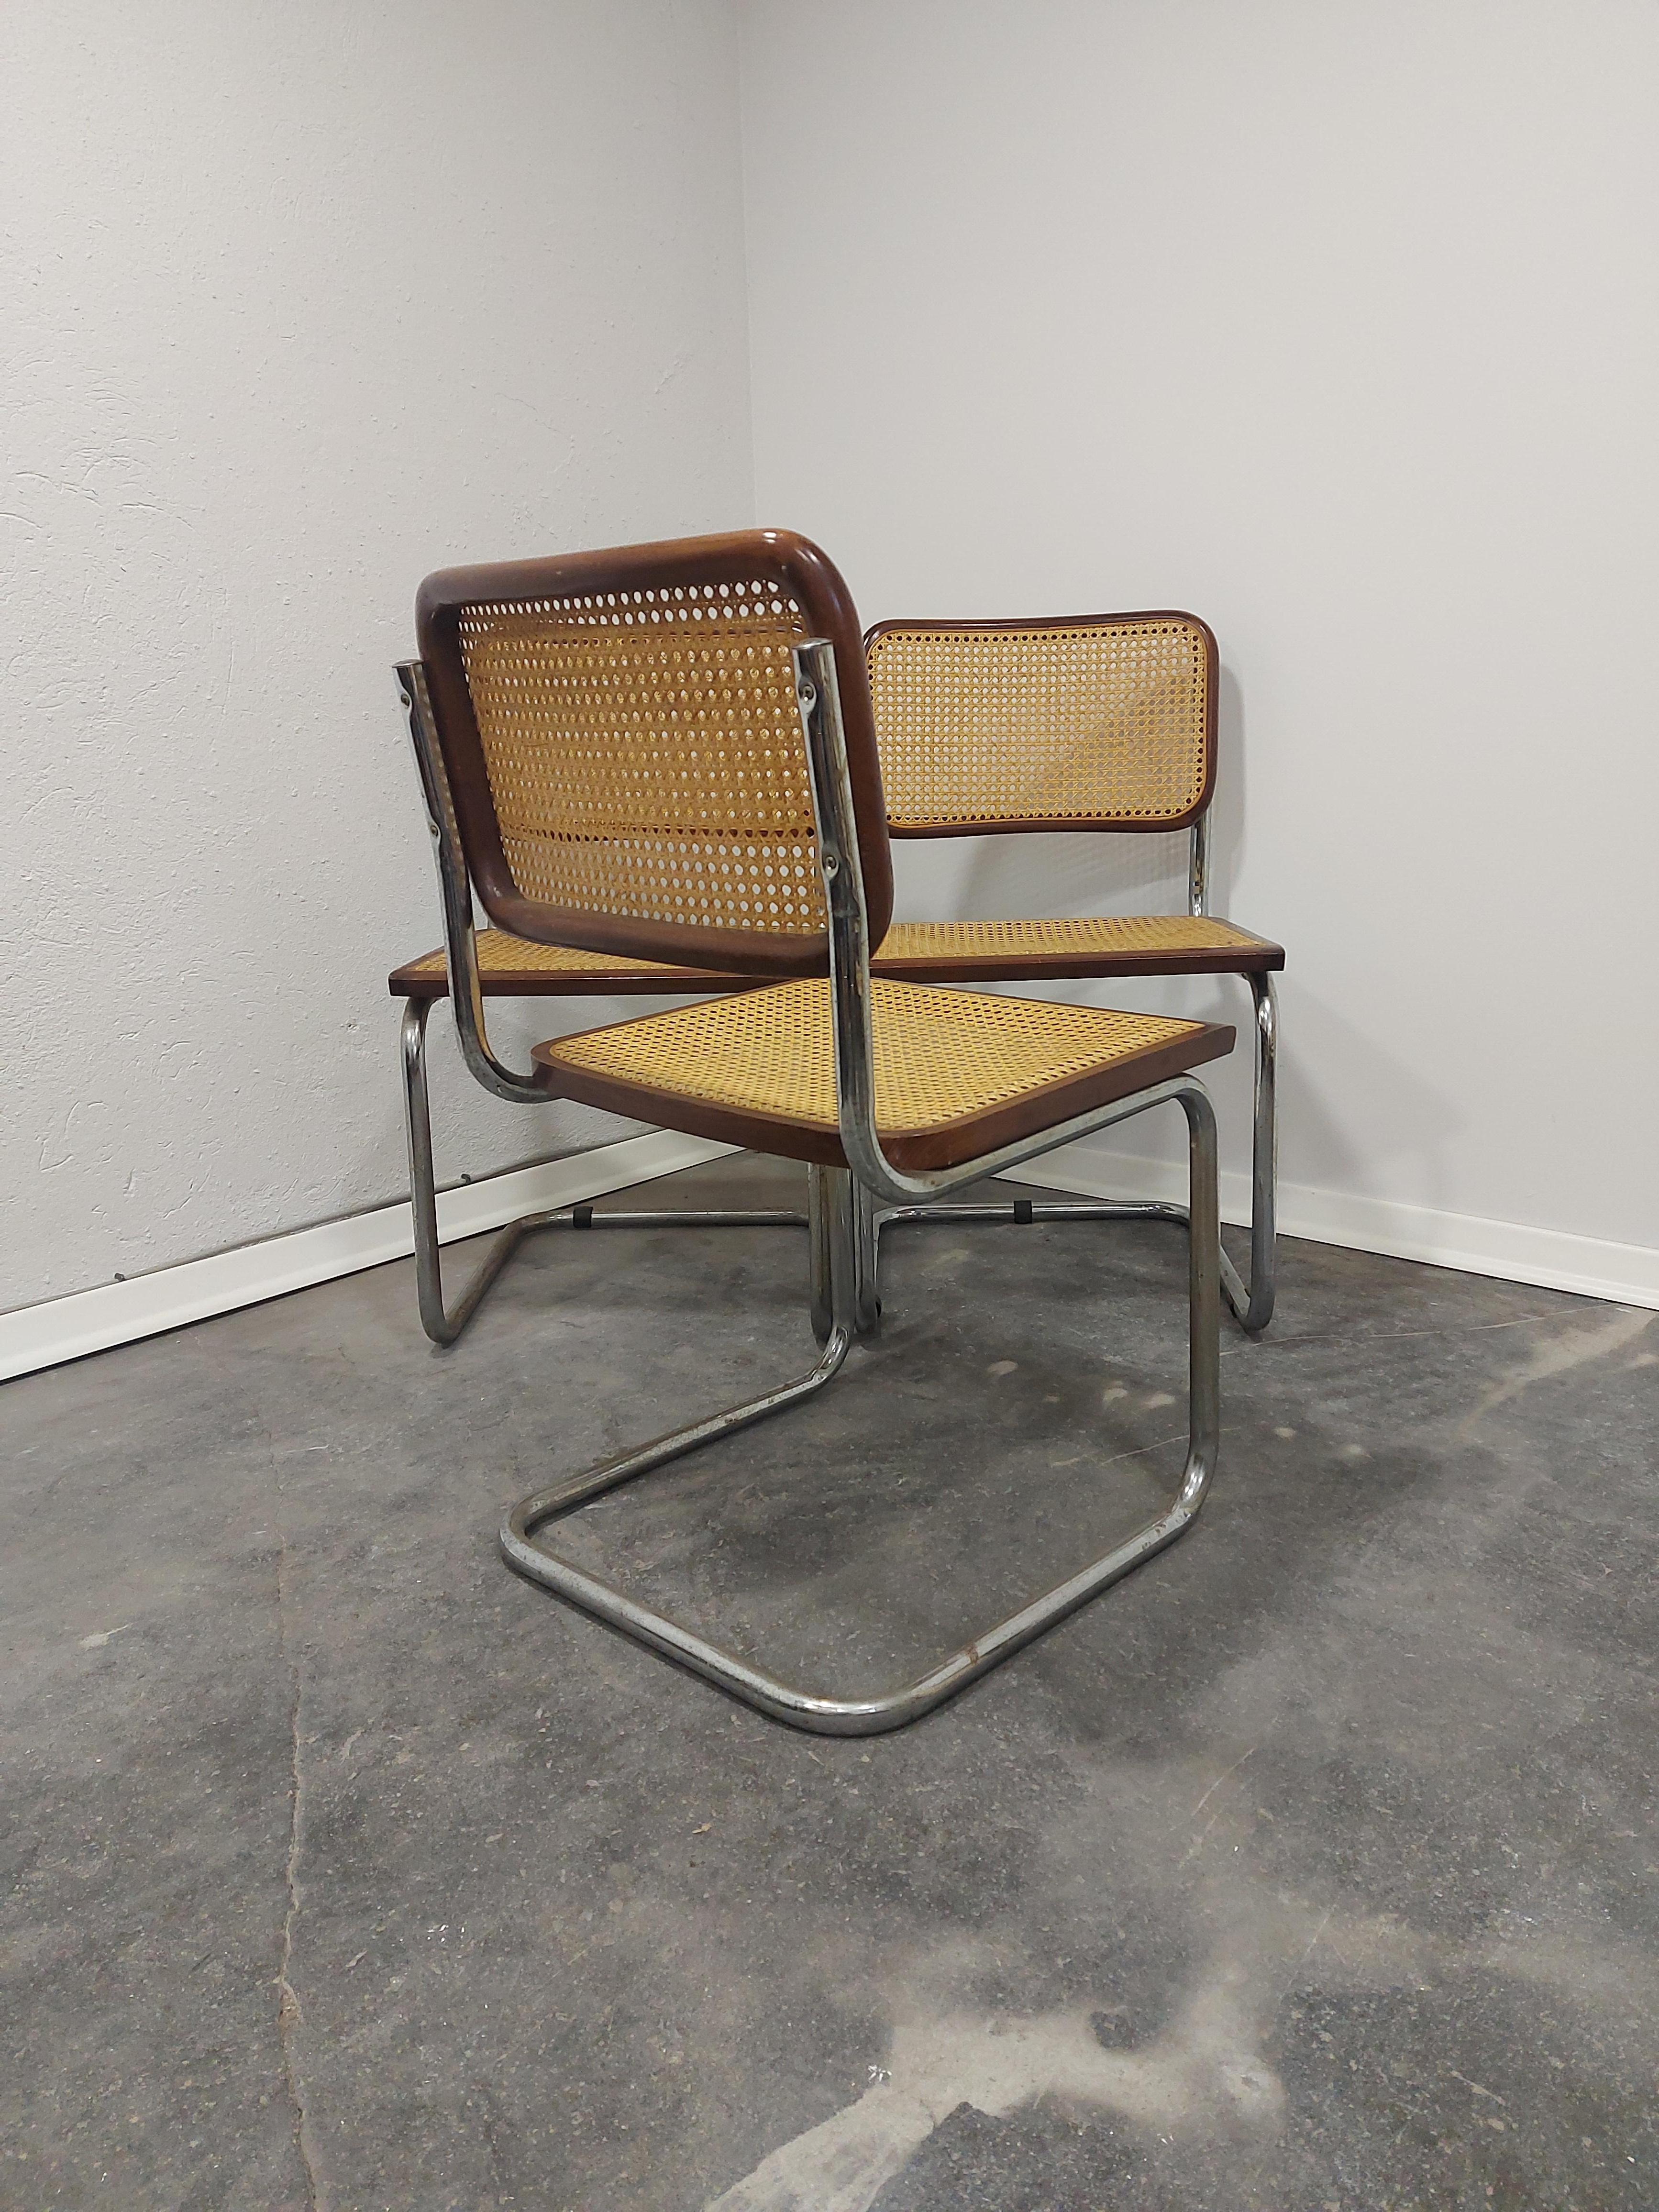 Slovenian Cesca Chair by Marcel Breuer 1970s B32 1 of 5 For Sale